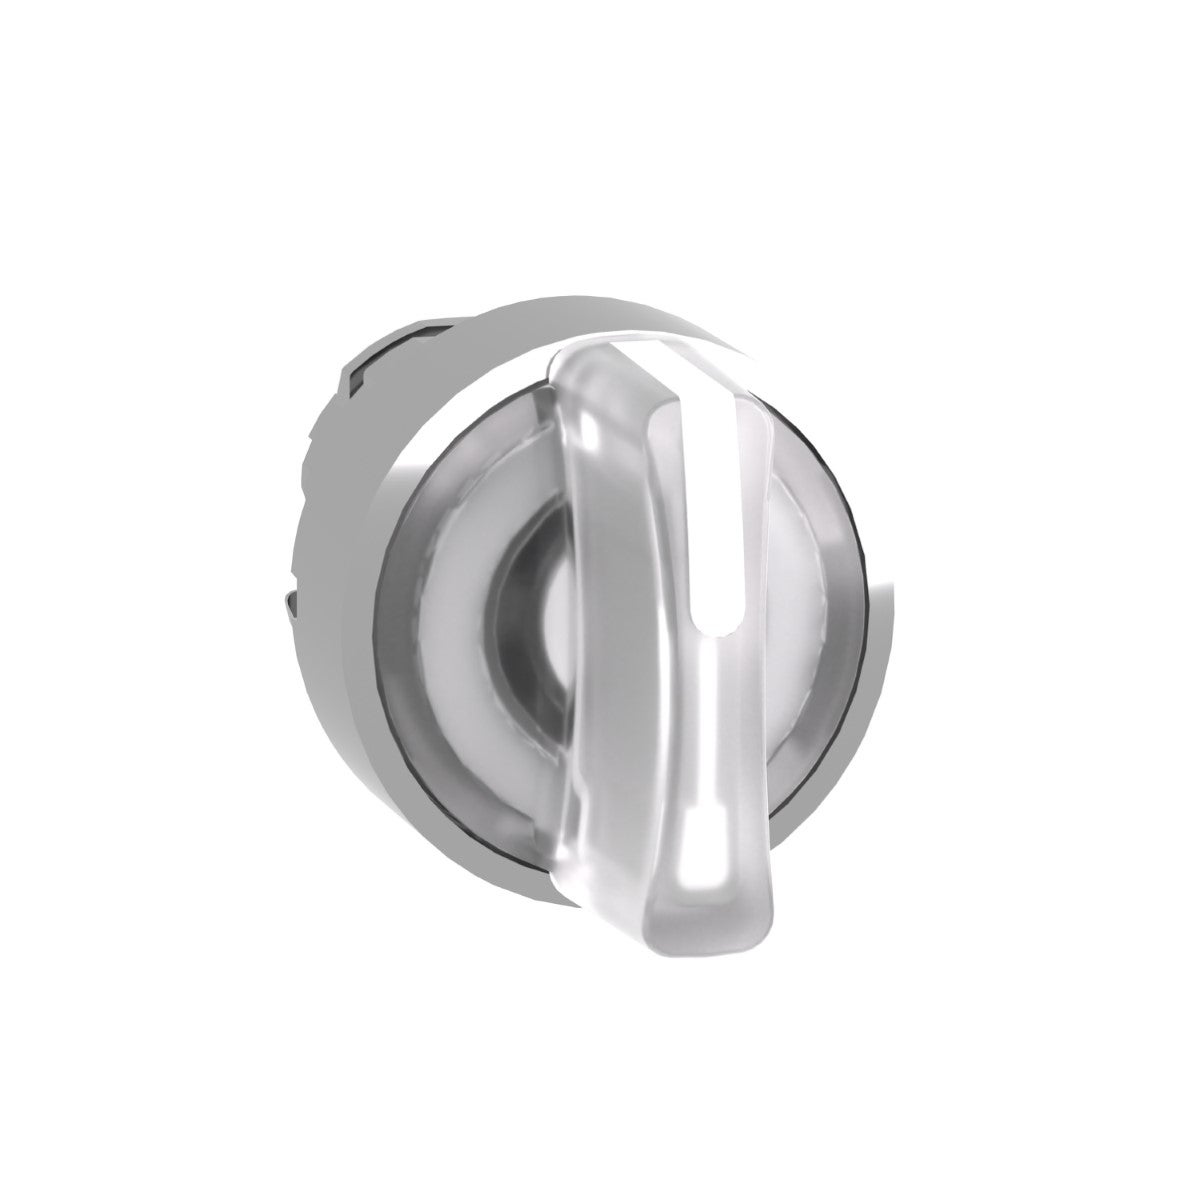 Head for illuminated selector switch, Harmony XB4, chromium metal, white handle, 22mm, universal LED, 3 positions